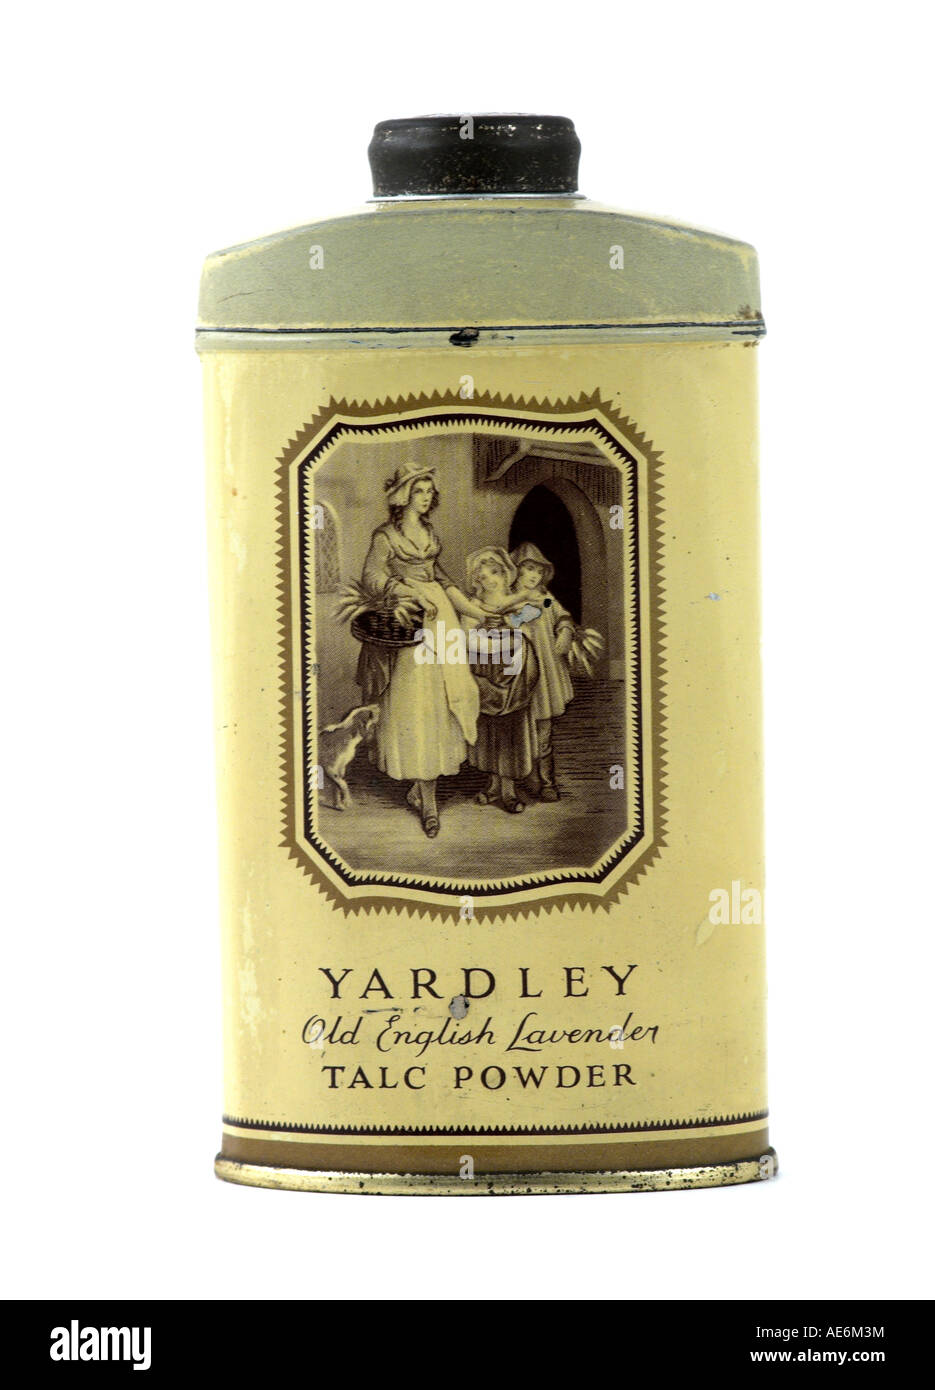 A Yardley old talc powder tin 1930s Editorial Use Only Stock Photo - Alamy